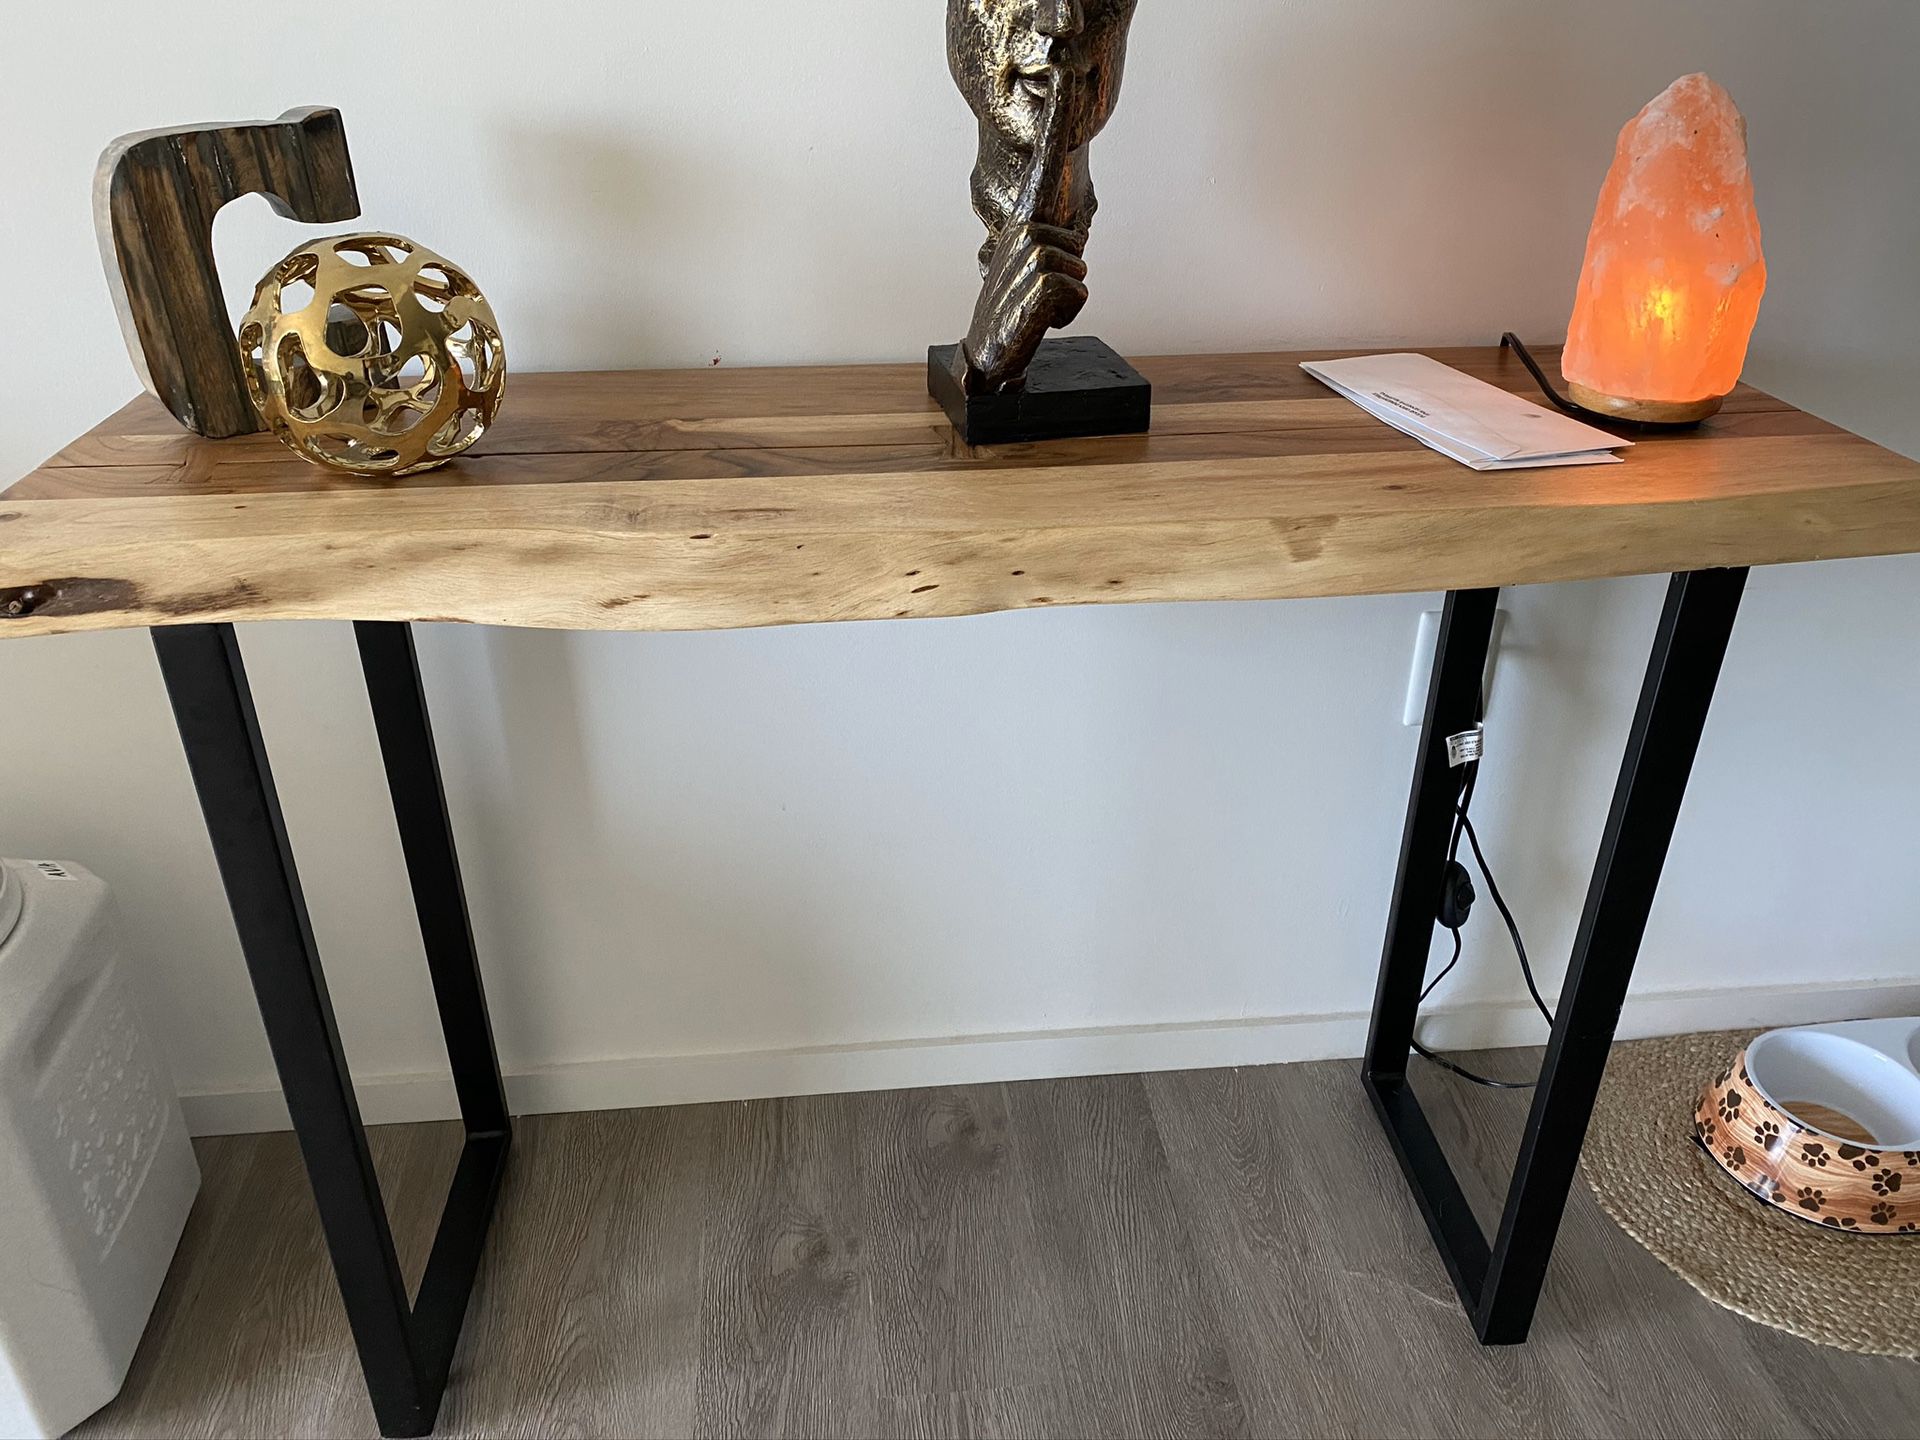 Wooden decorative table